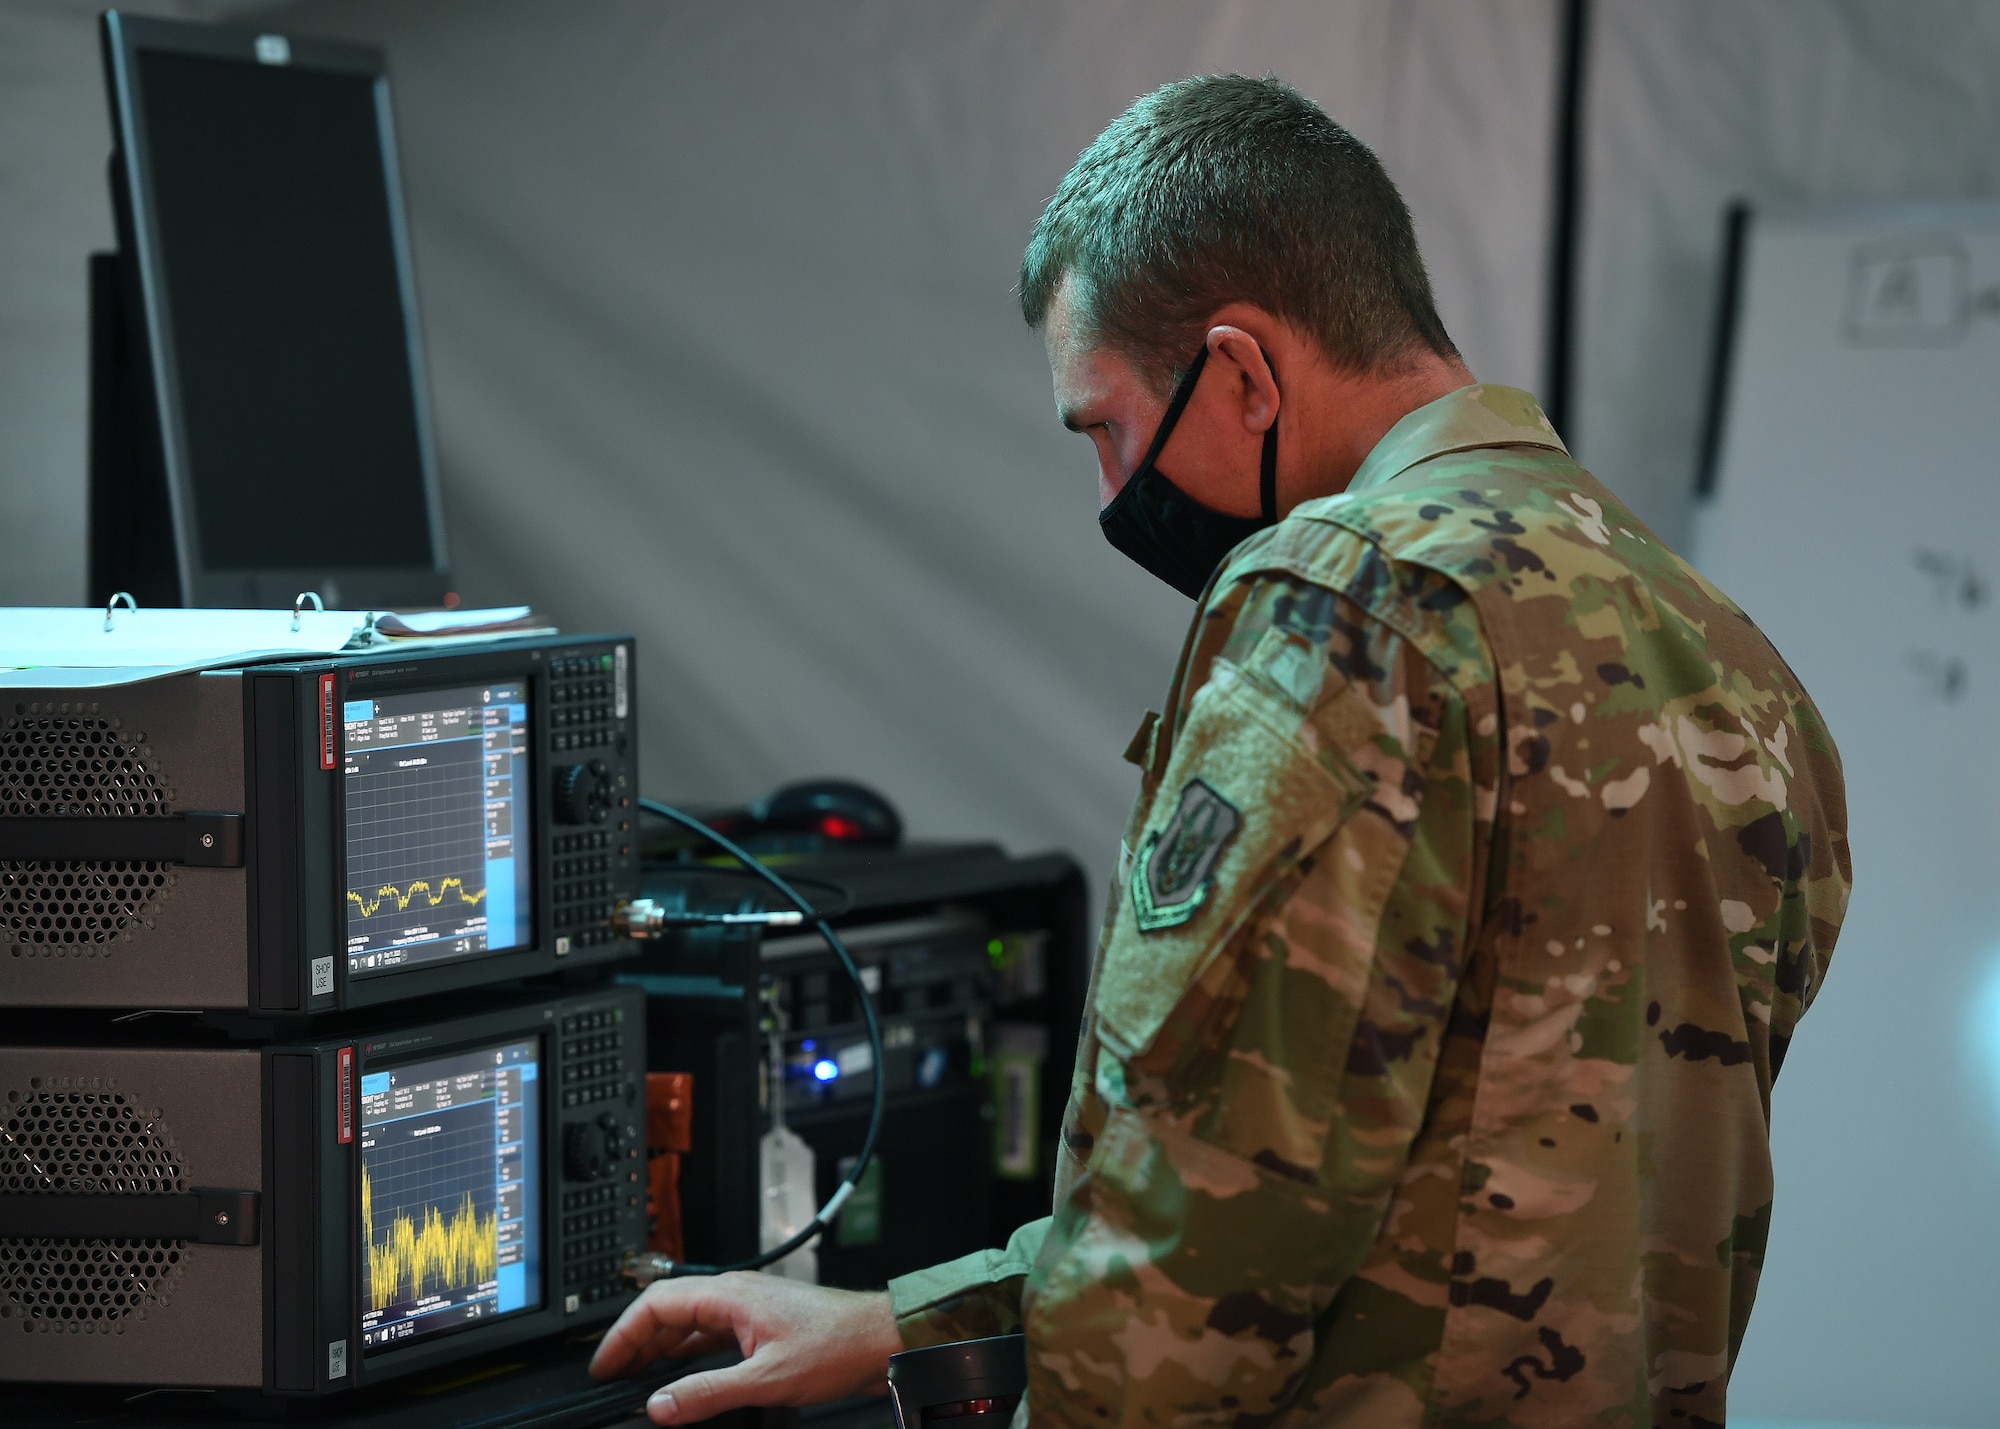 Staff Sgt. Shaun Gutierrez, 379th Space Range Squadron, calibrates the Spectrum Analyzer during the 379th SRS Field Training Exercise, Sept. 10-13, 2020, at the United States Air Force Academy's Field Engineering Readiness Laboratory, Colorado. (U.S. Air Force photo by Dennis Rogers)